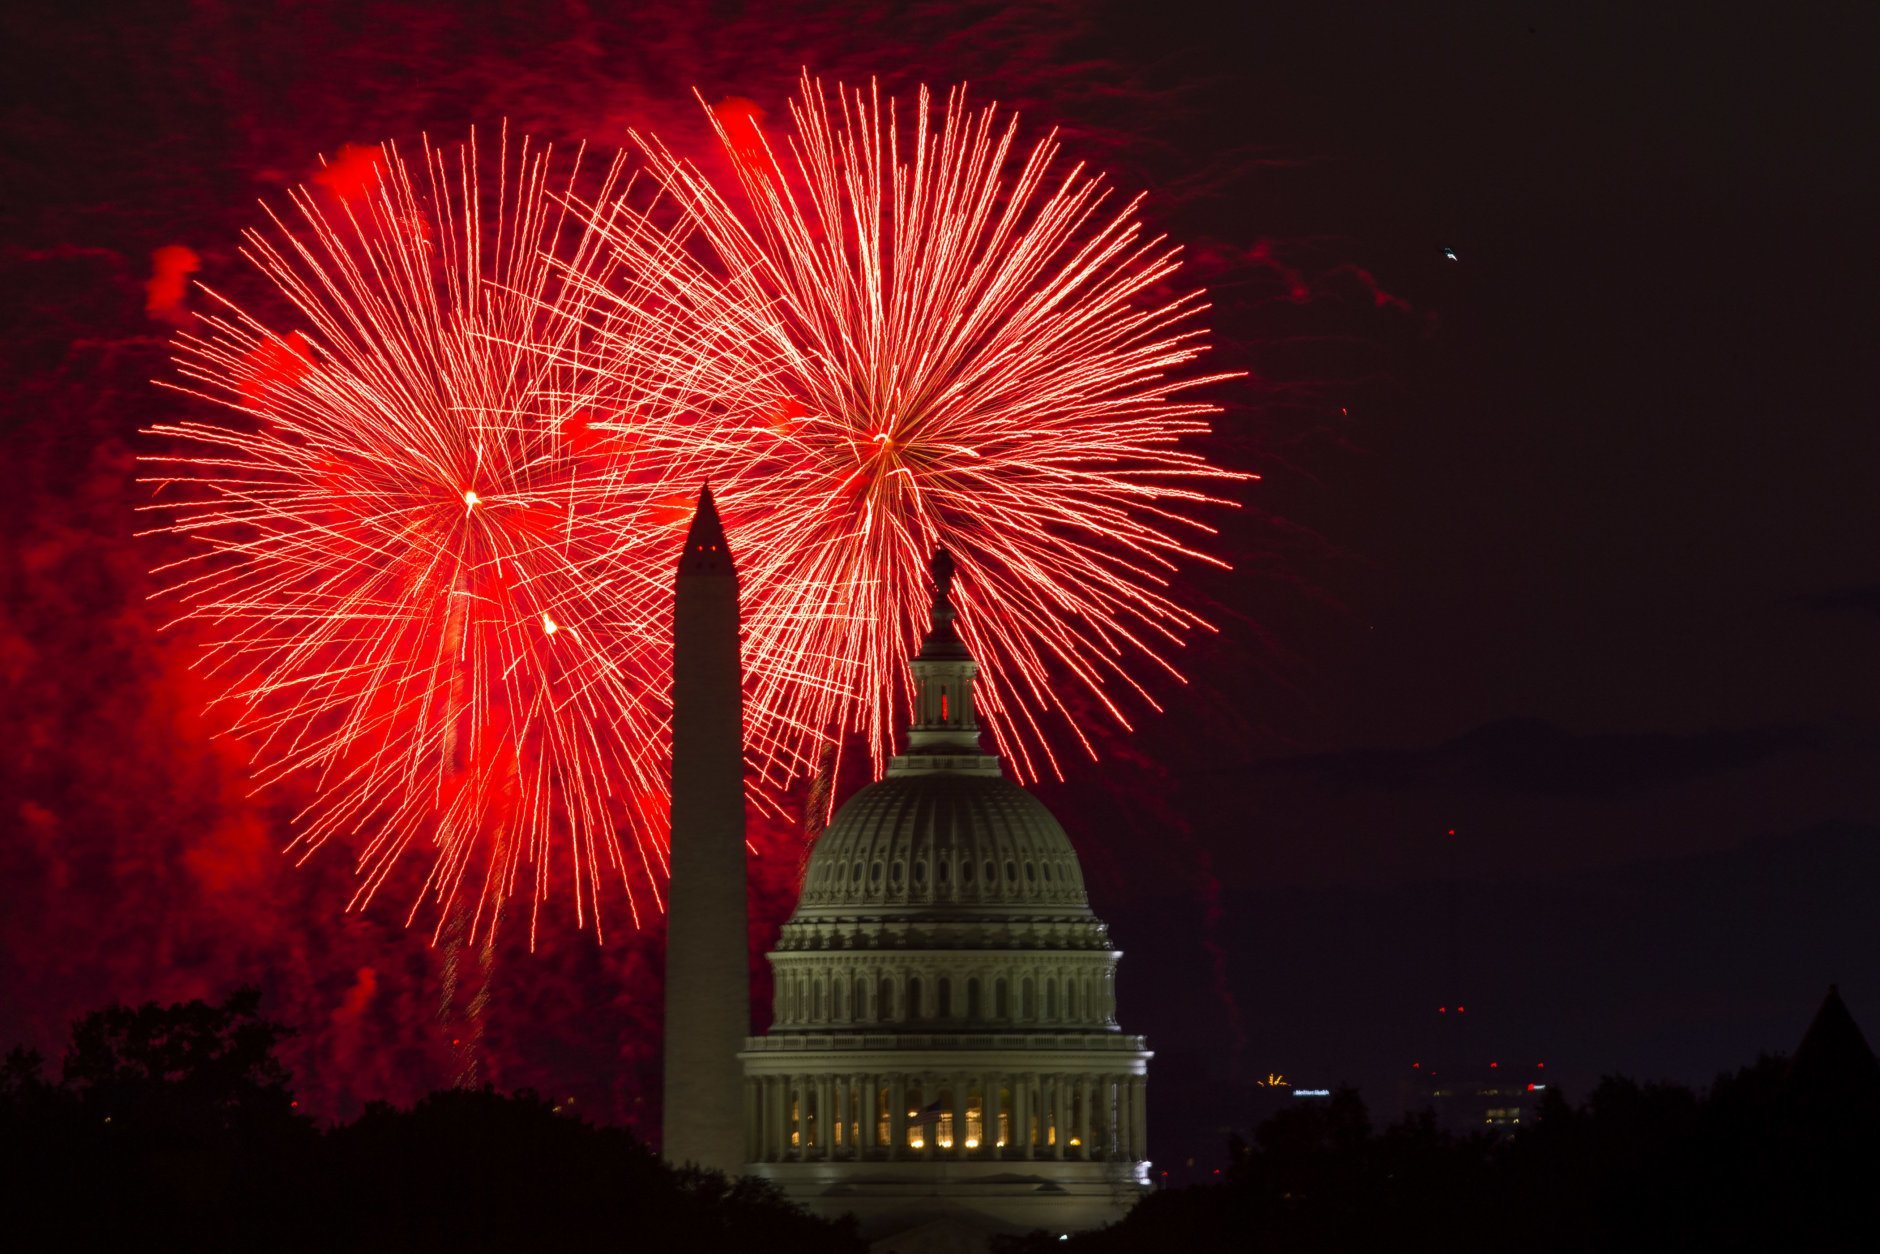 Fireworks illuminate the sky over the U.S. Capitol building and the Washington Monument during Fourth of July celebrations, on Friday, July 4, 2014, in Washington. (AP Photo/Evan Vucci)